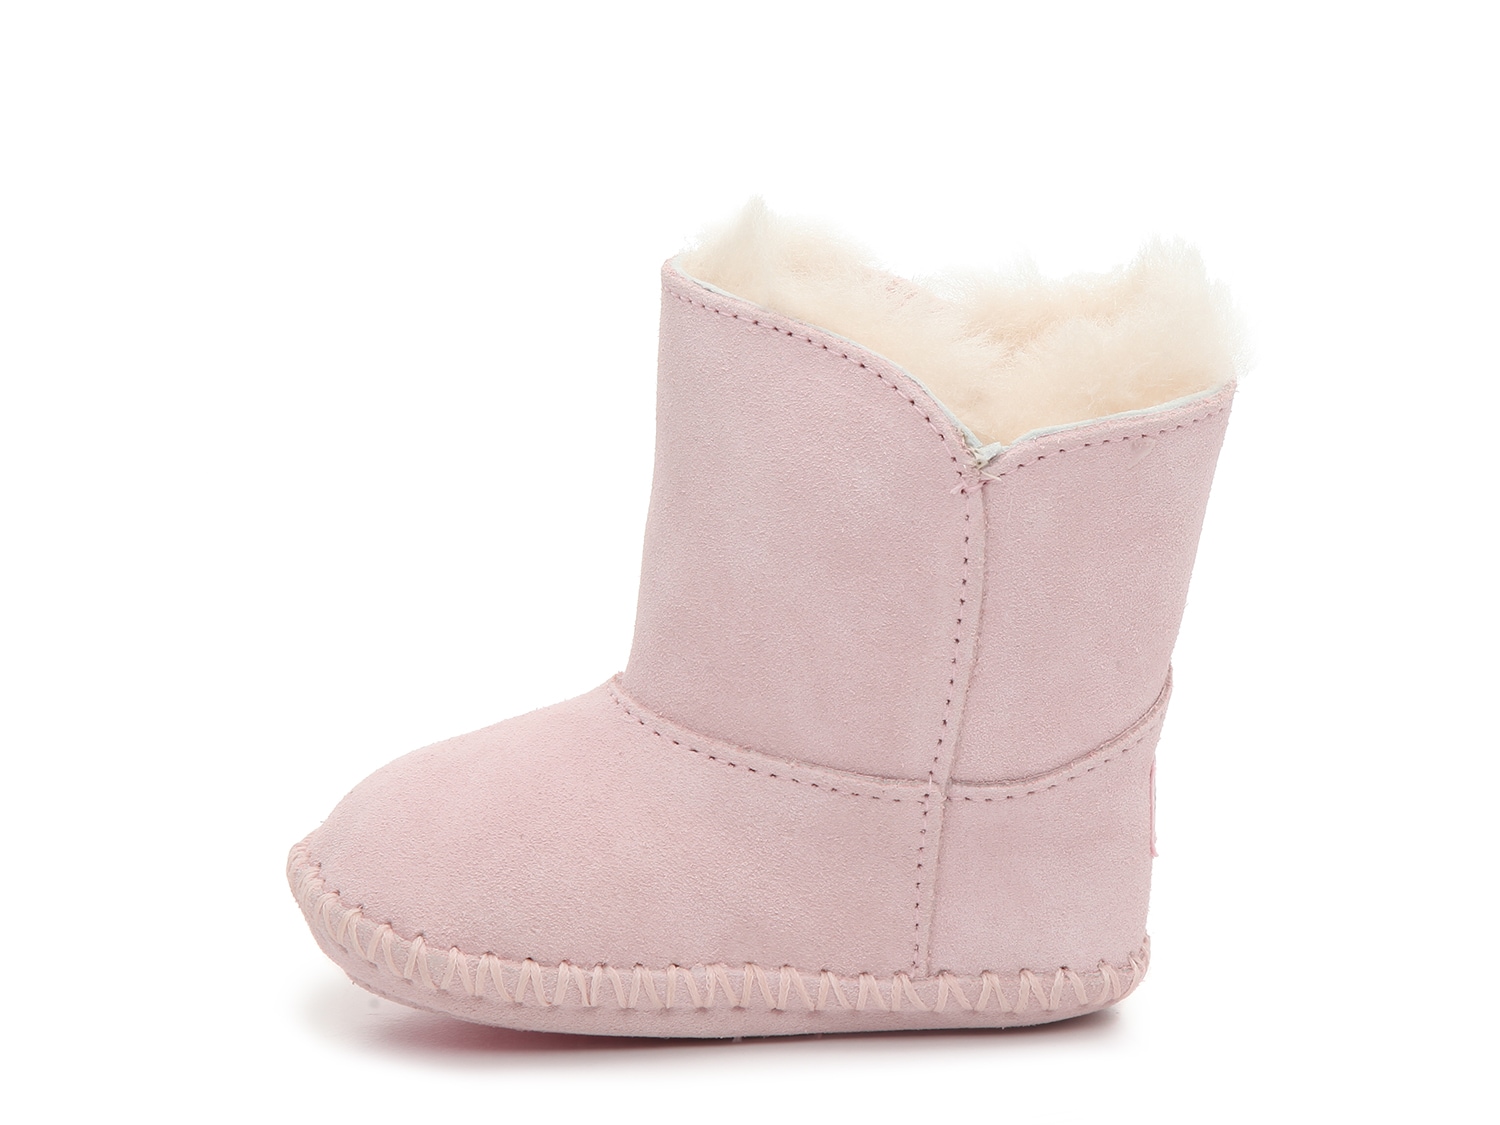 UGG Cassie Poppy Infant Boot Kids Shoes 